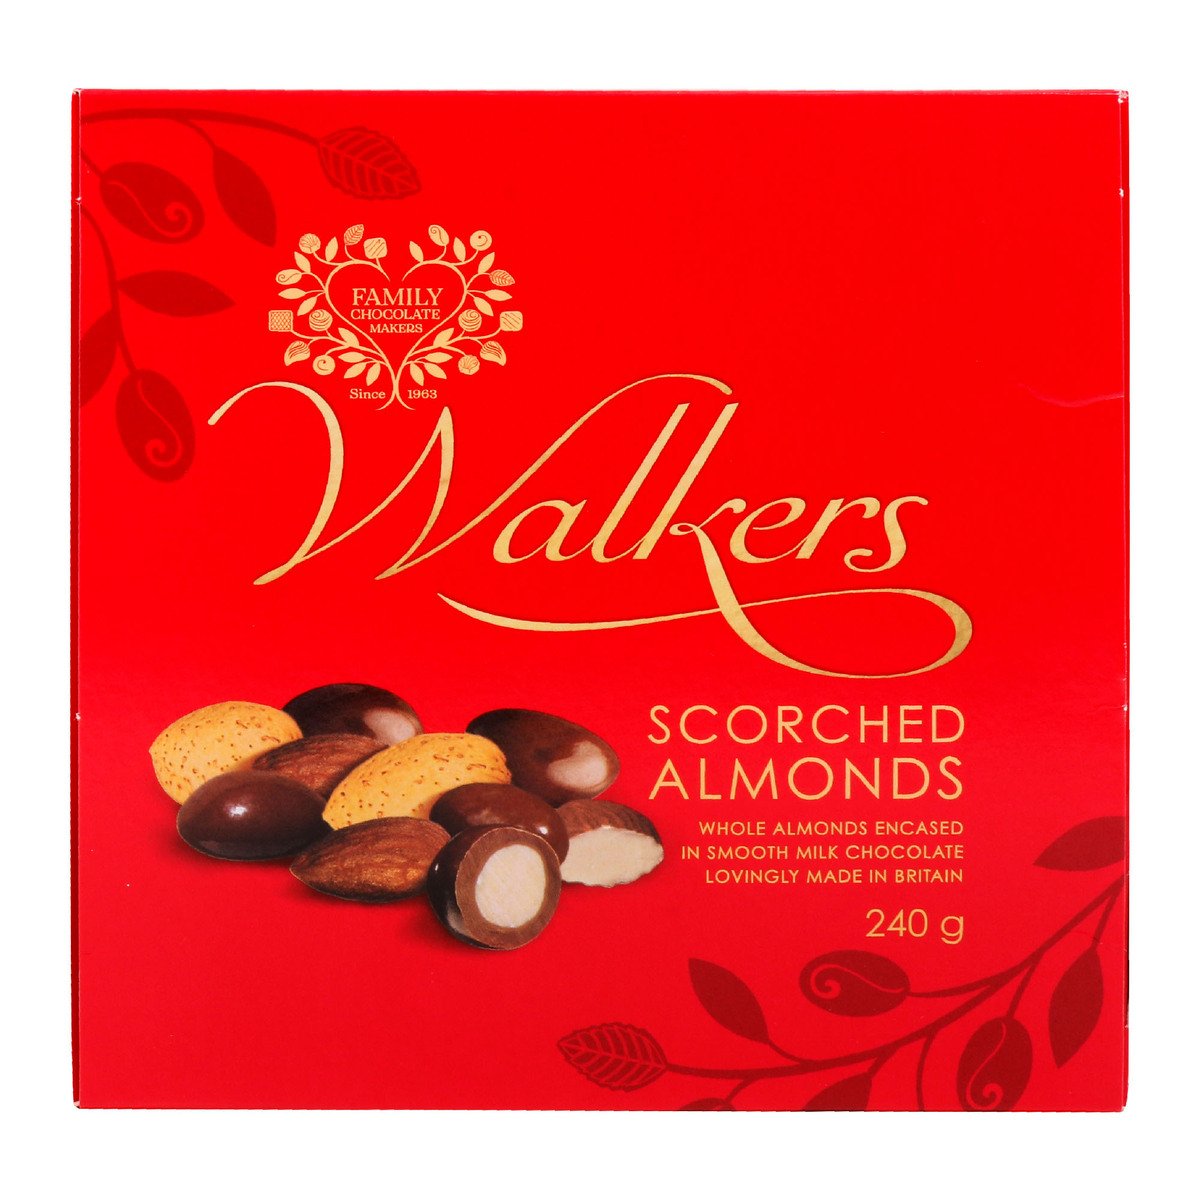 Walkers Scorched Almonds Milk Chocolate 240g